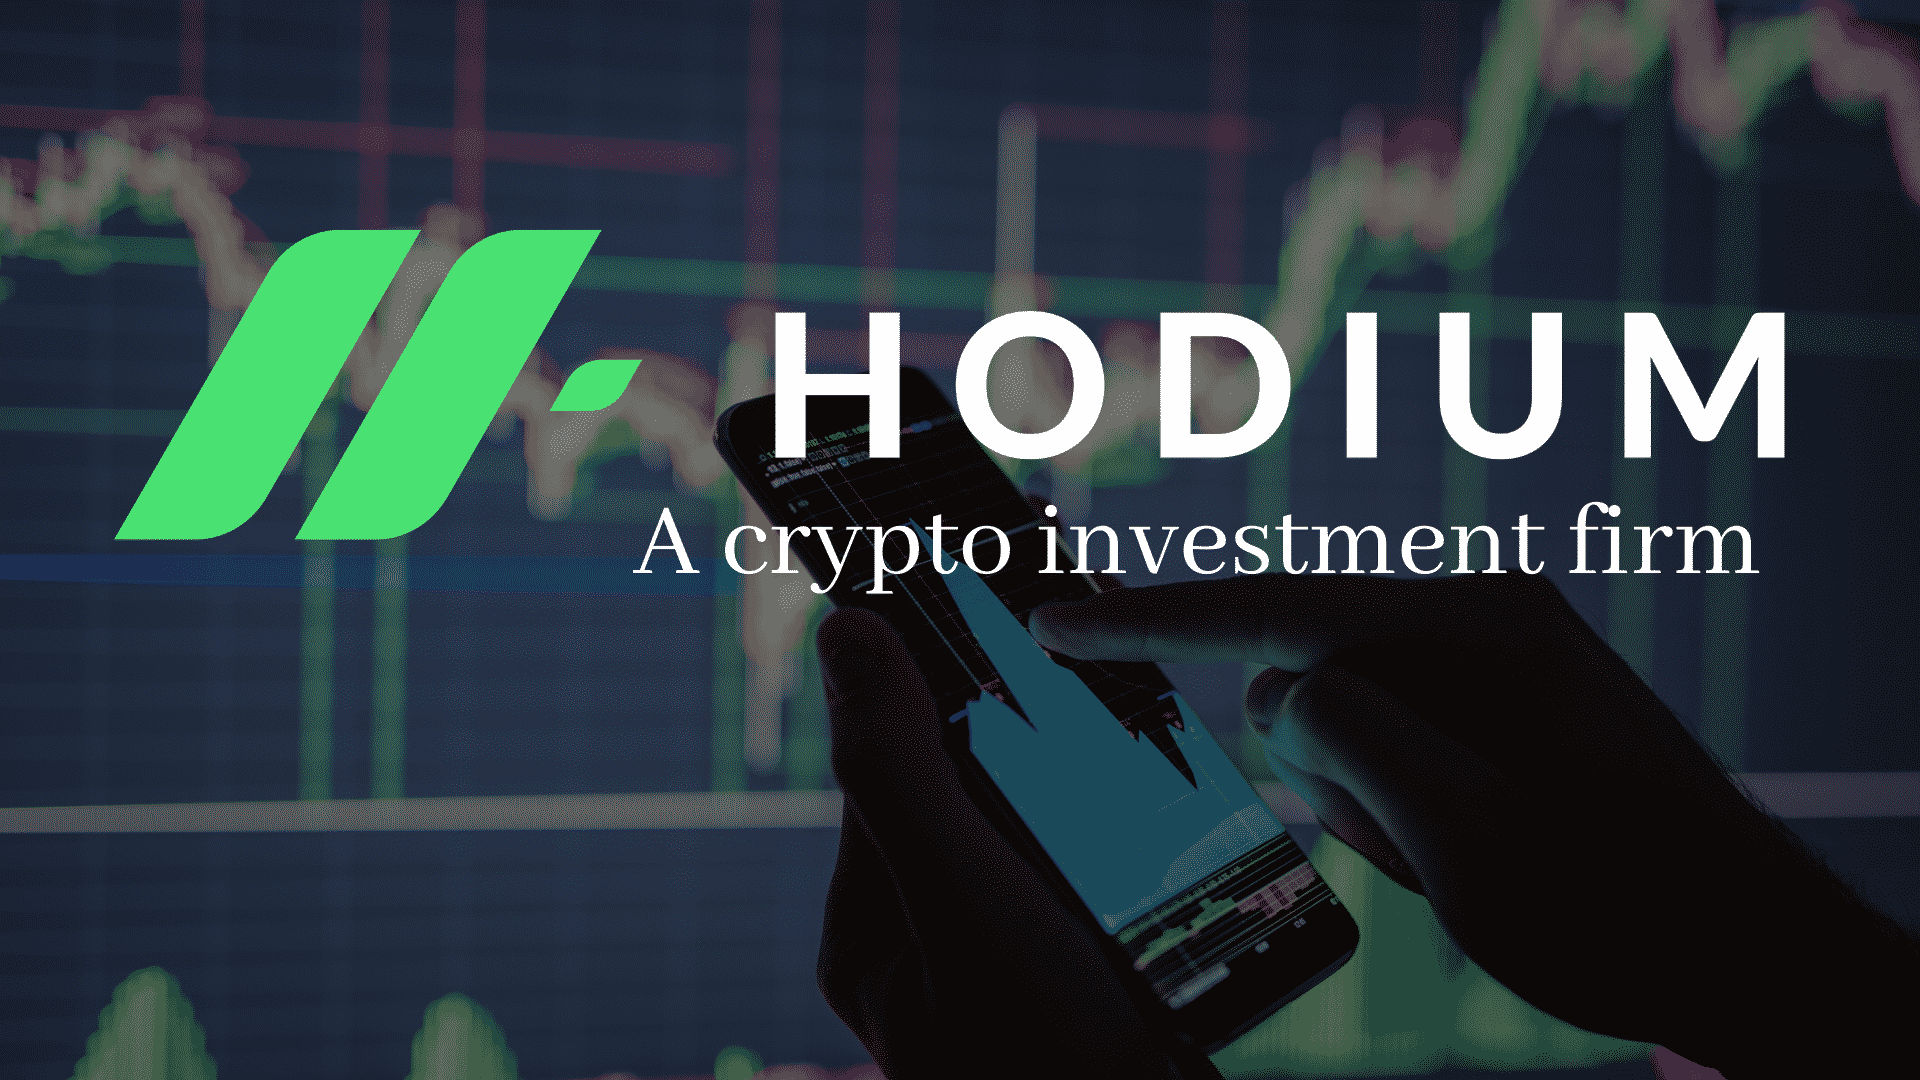 Beat the Crypto Market by Hodium Investment Firm and Generate Daily Returns